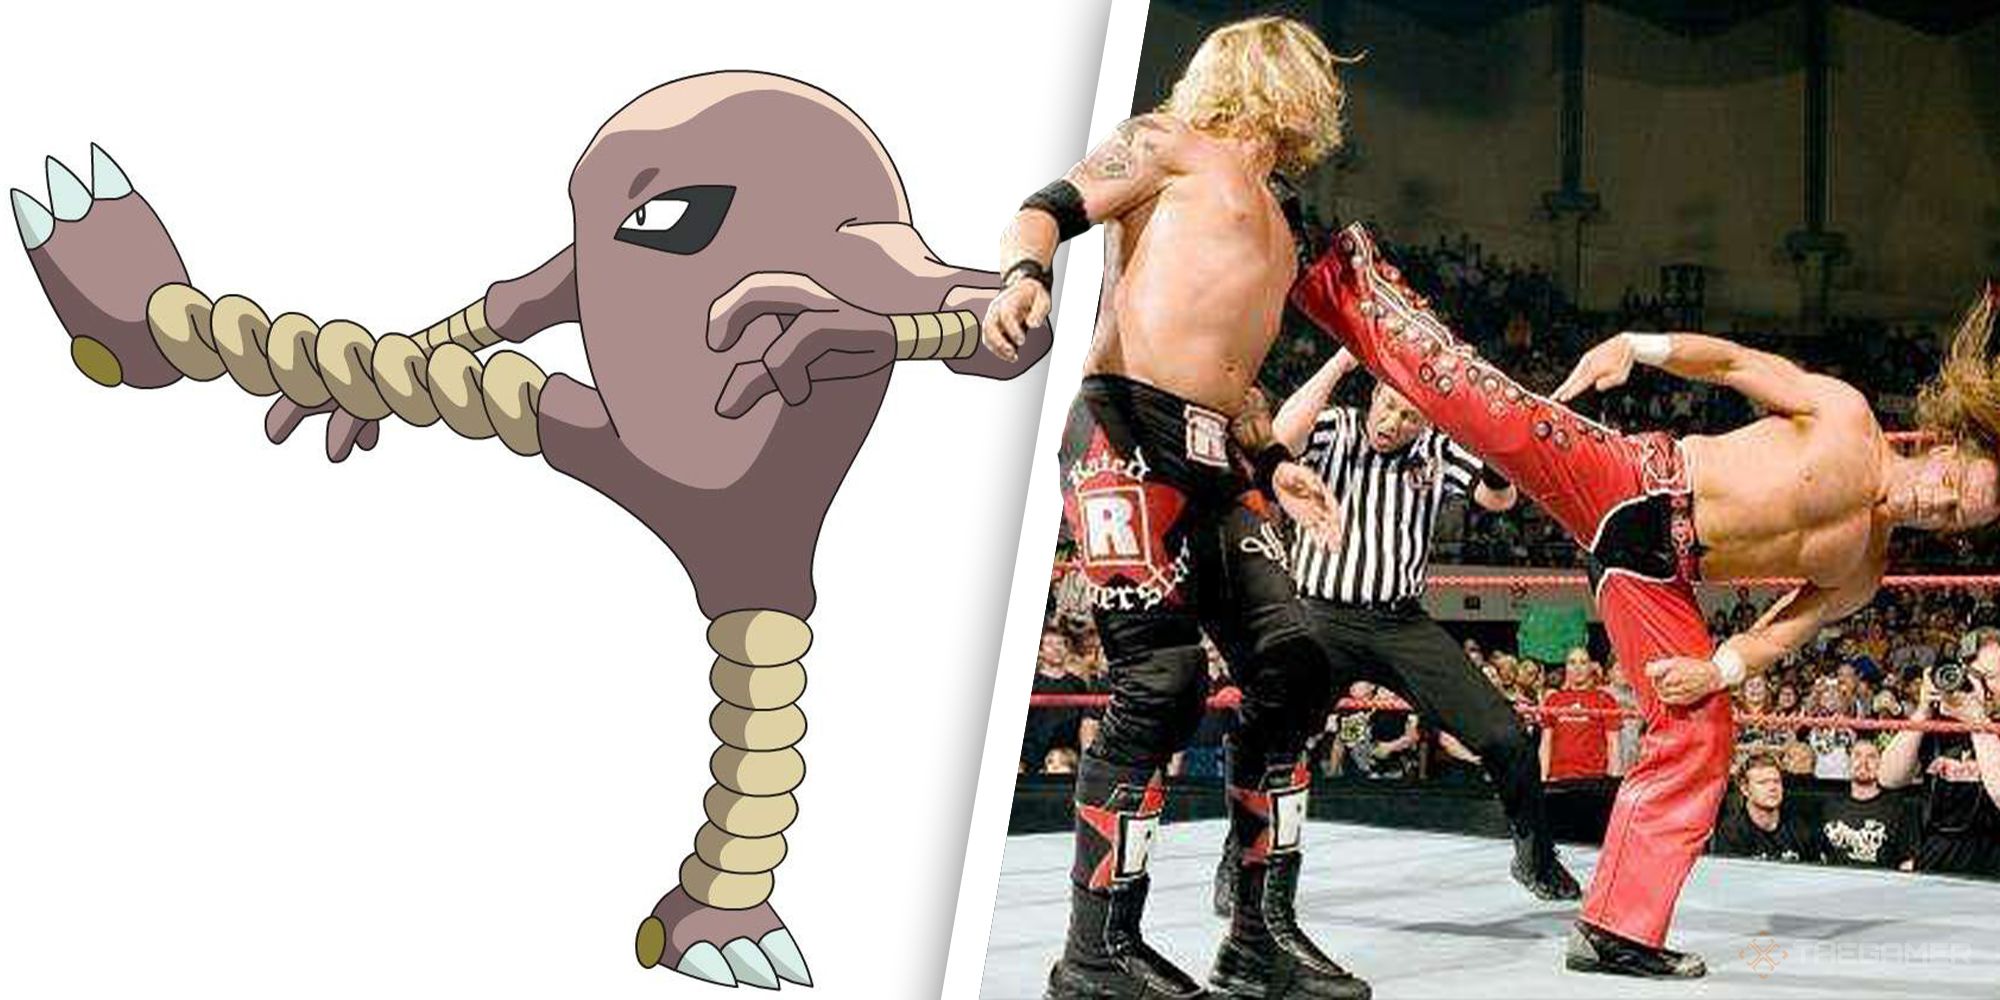 Heres 30 Wrestlers As Pokemon For The Royal Rumble (10)